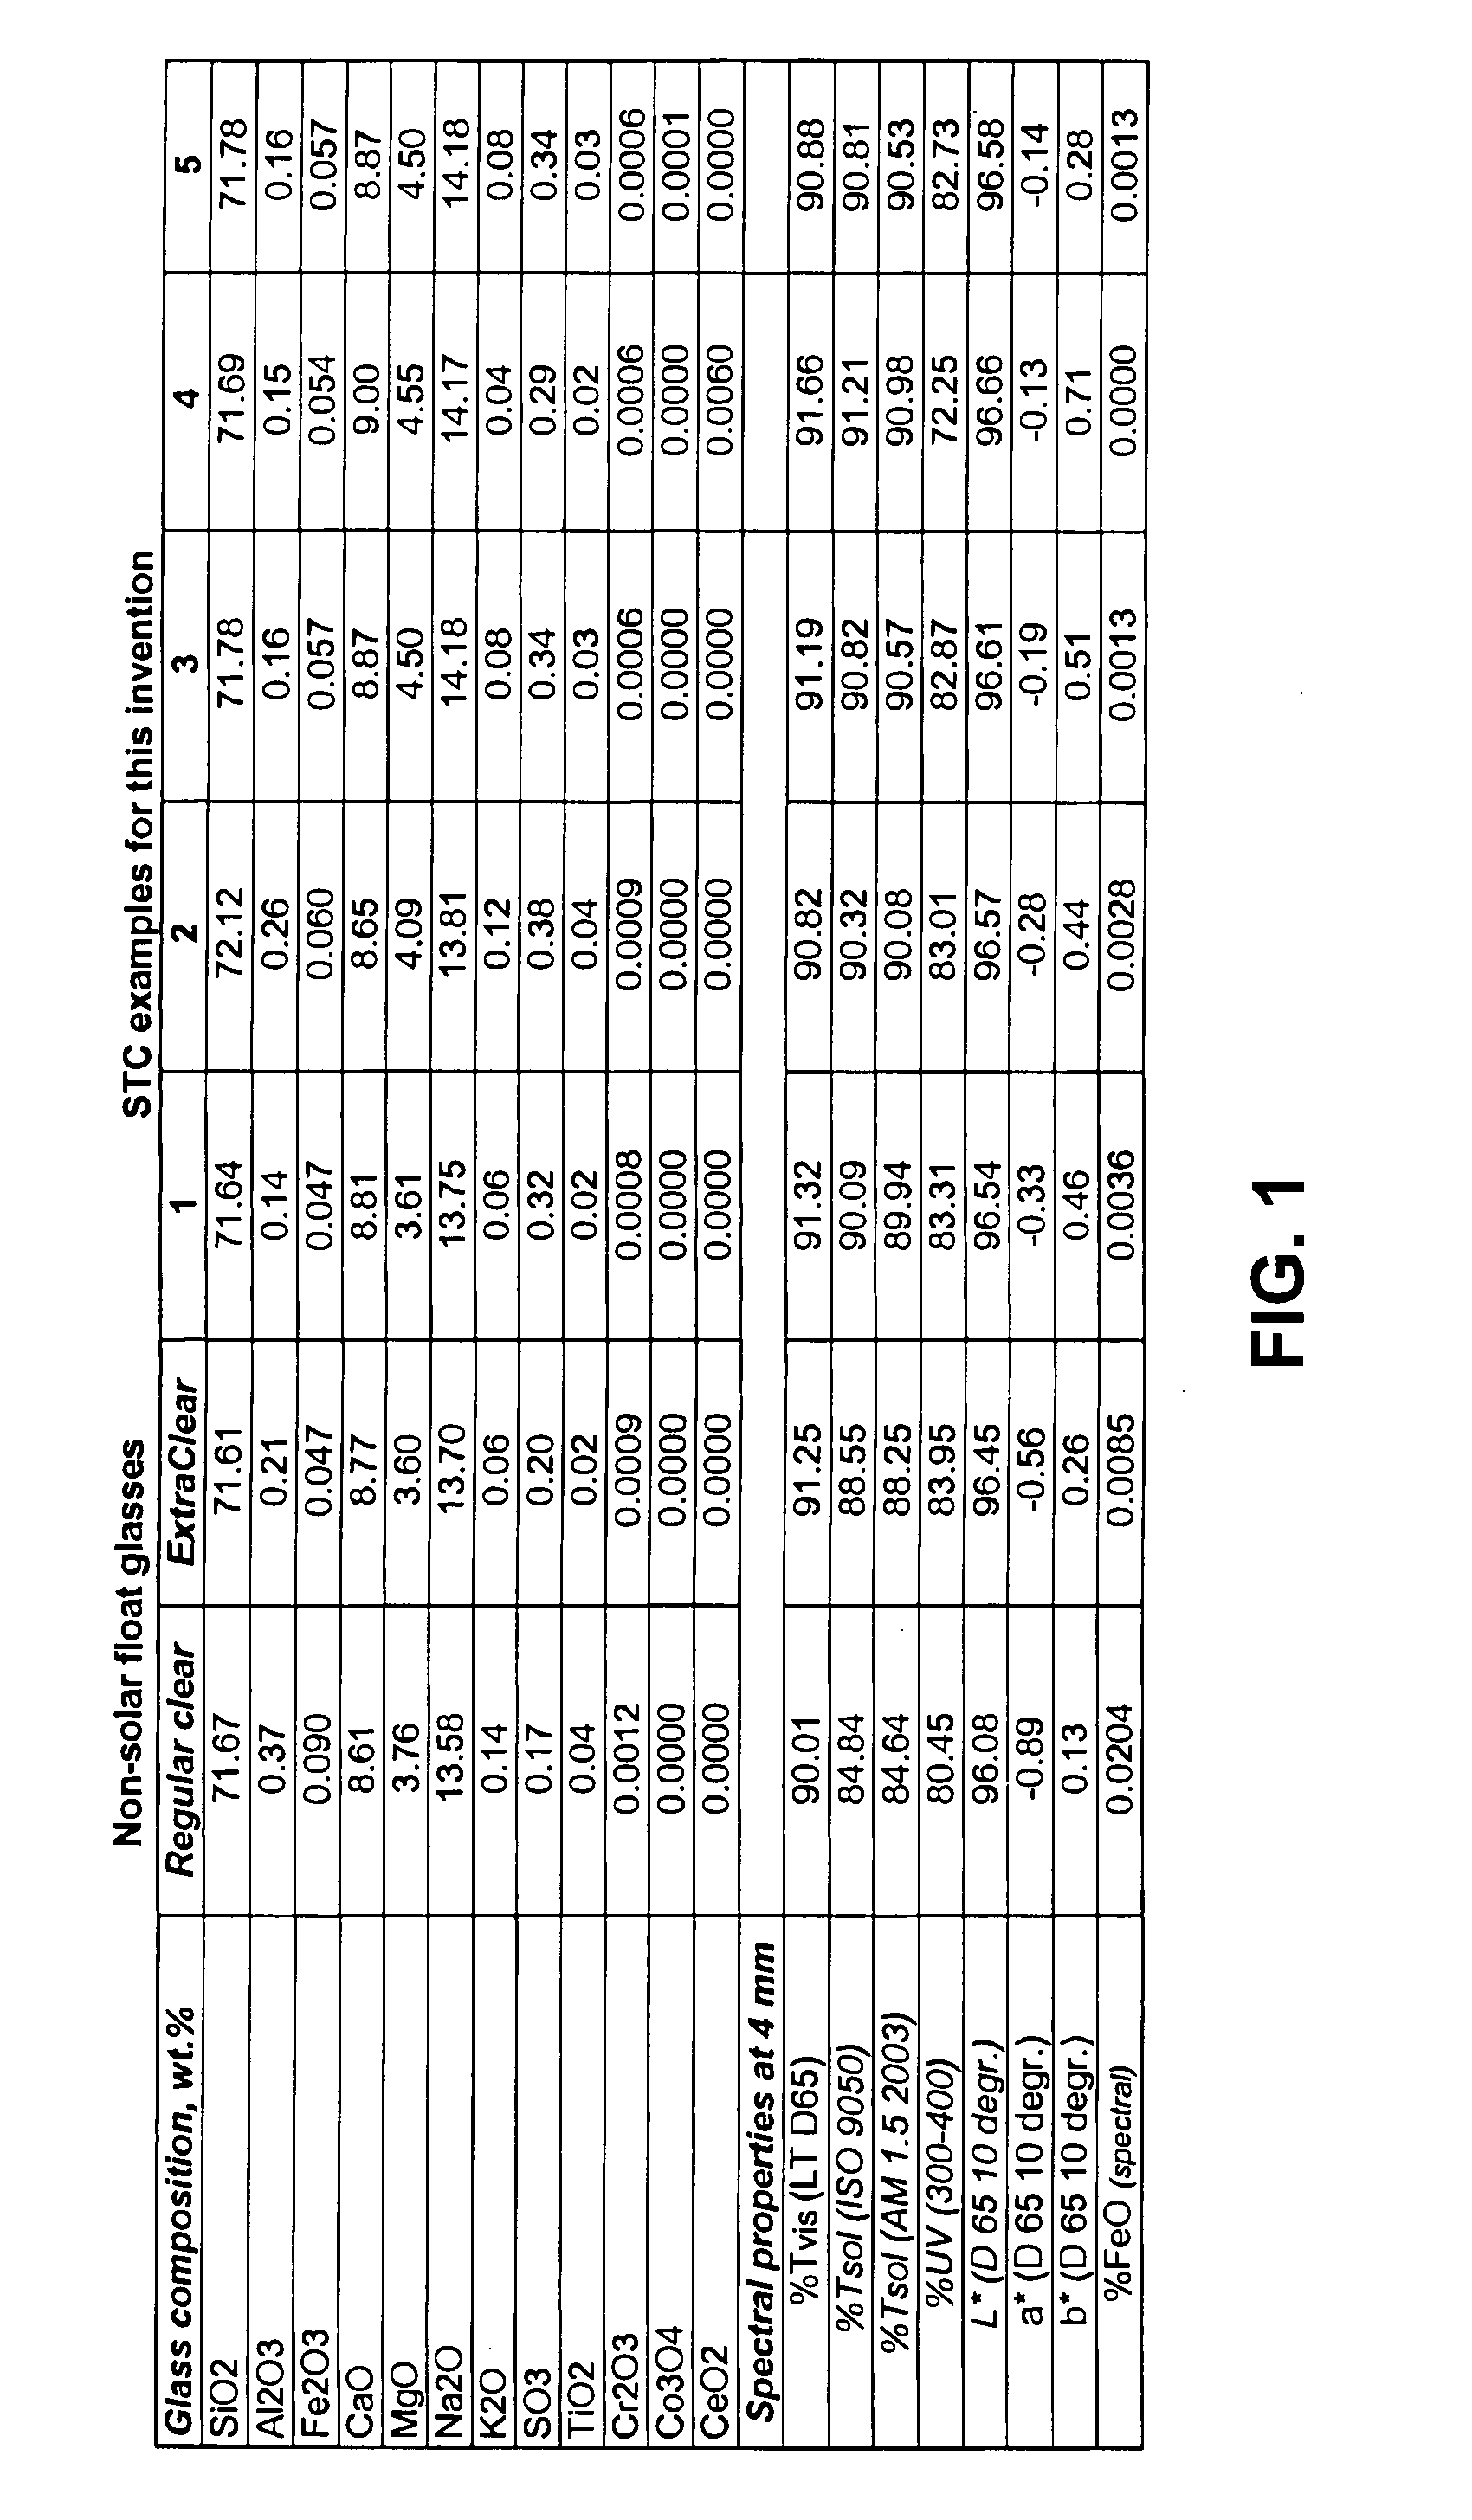 Low iron high transmission float glass for solar cell applications and method of making same